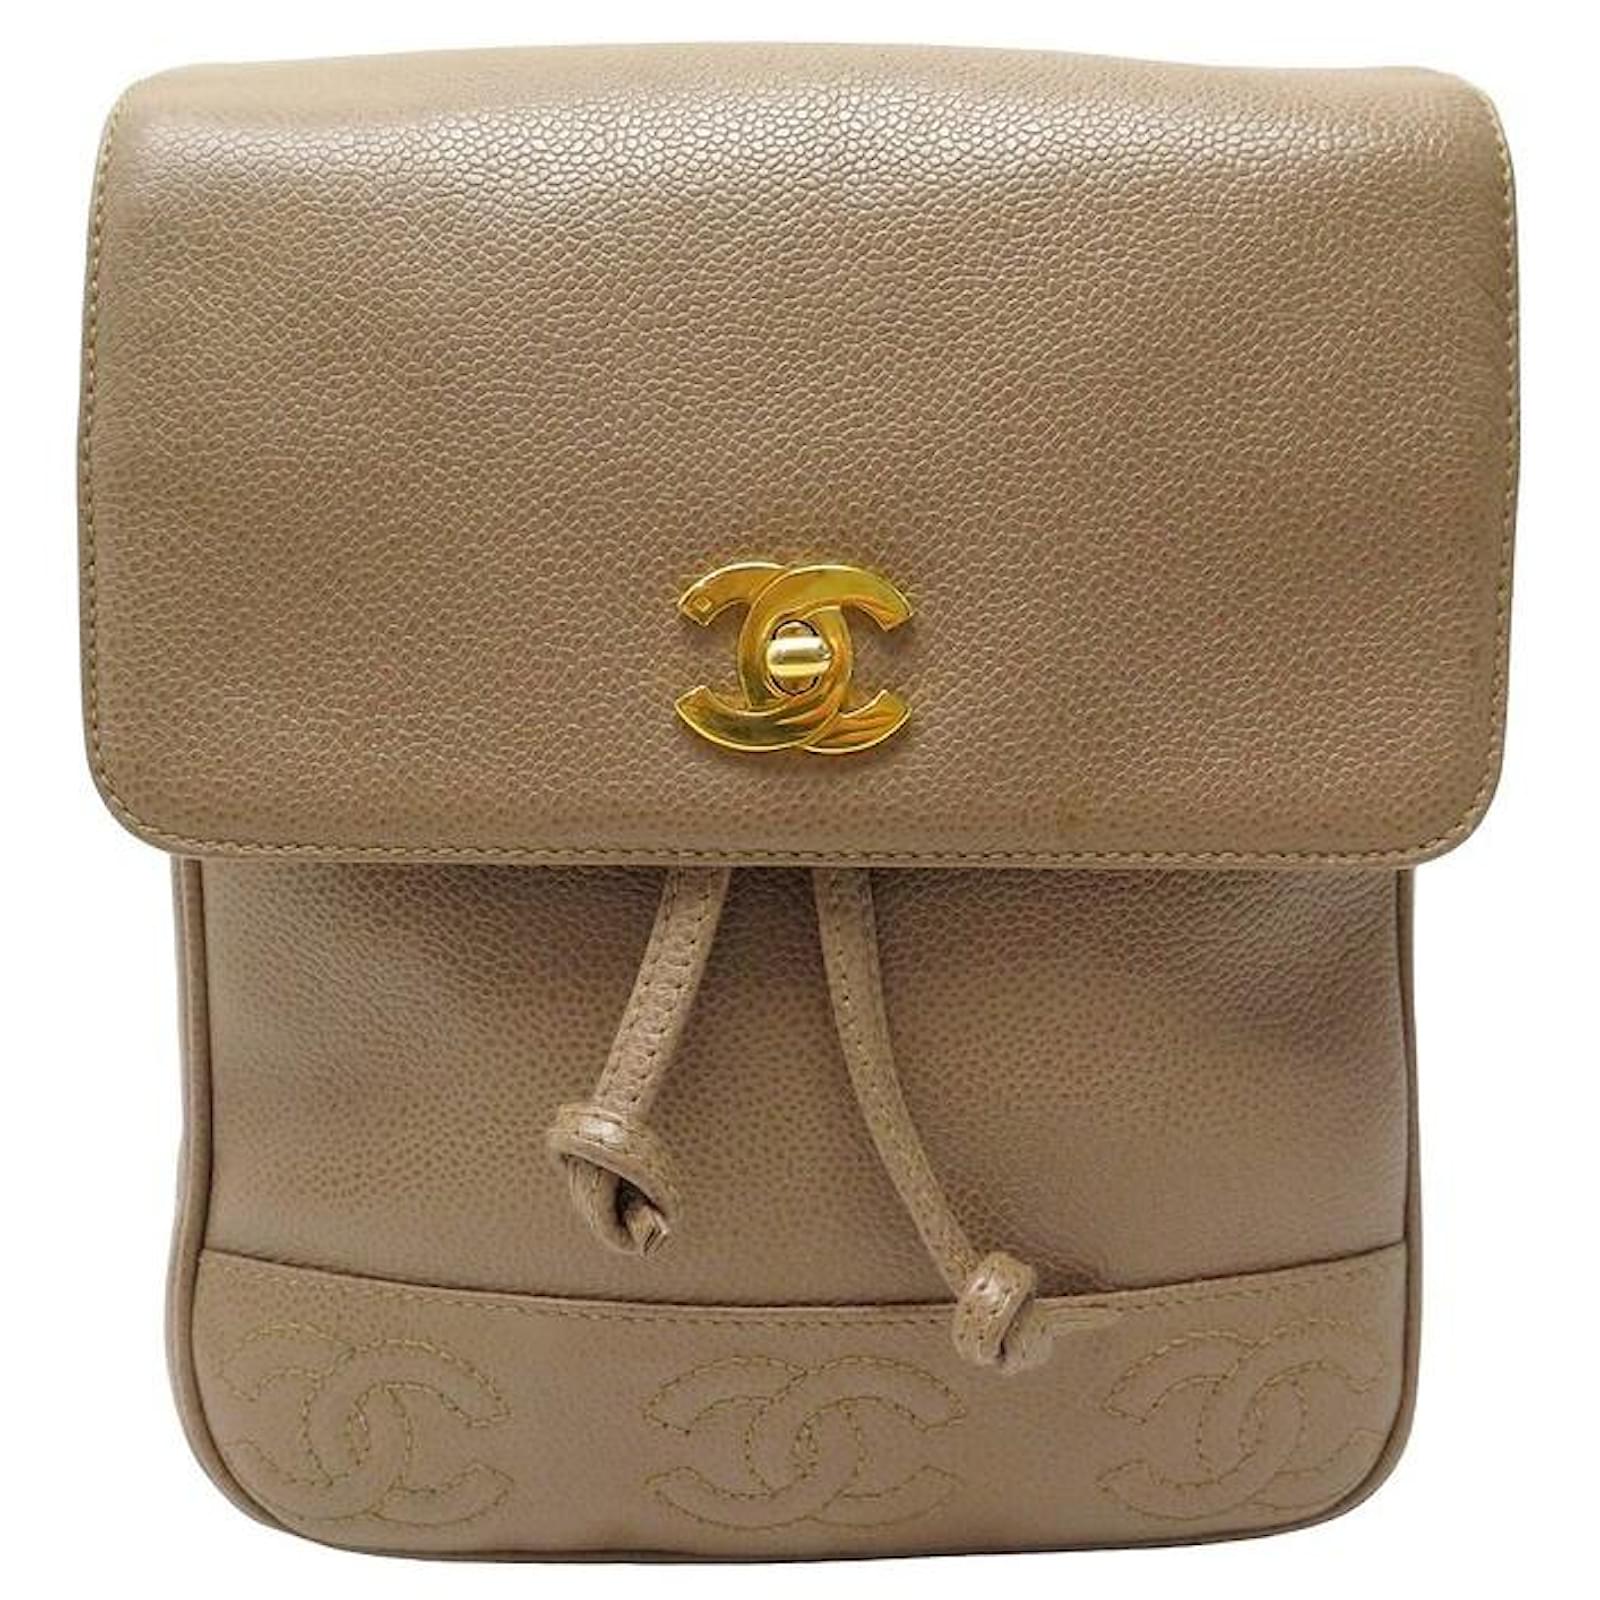 CHANEL, Bags, Chanel Vintage Ltd Edition Ultra Rare Belted Bucket Bag  With Goldleather Chain